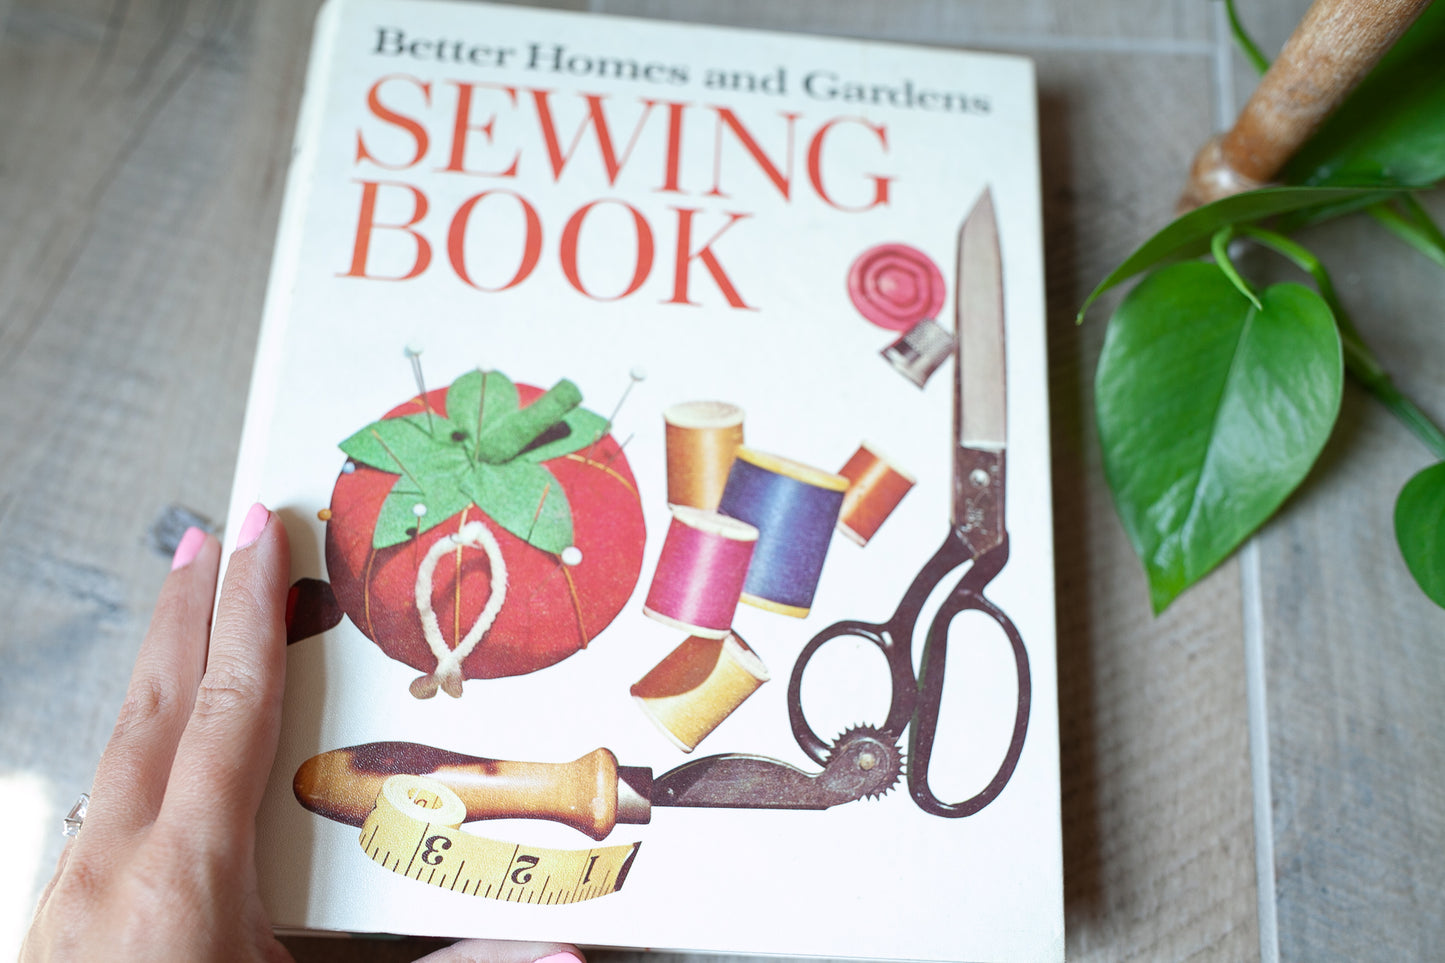 Vintage Sewing Book -Better Homes and Gardens Sewing Book